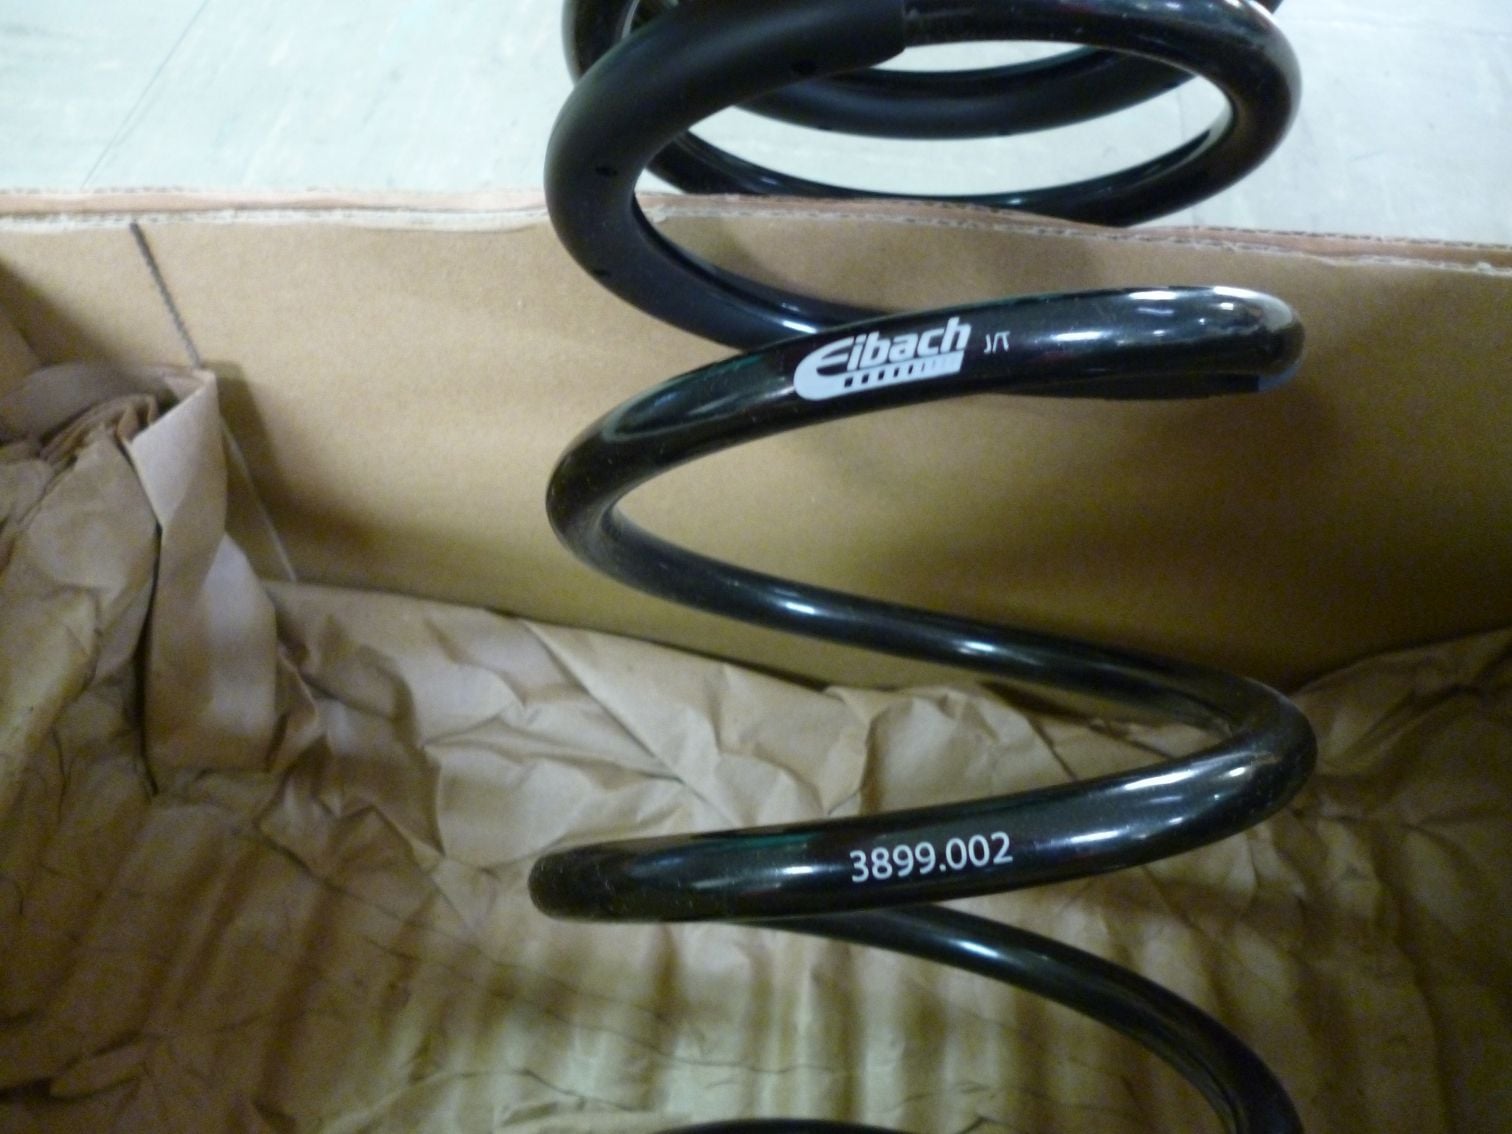 Steering/Suspension - HHR Eibach Lowering Springs - New - -1 to 2025  All Models - New Springfield, OH 44443, United States